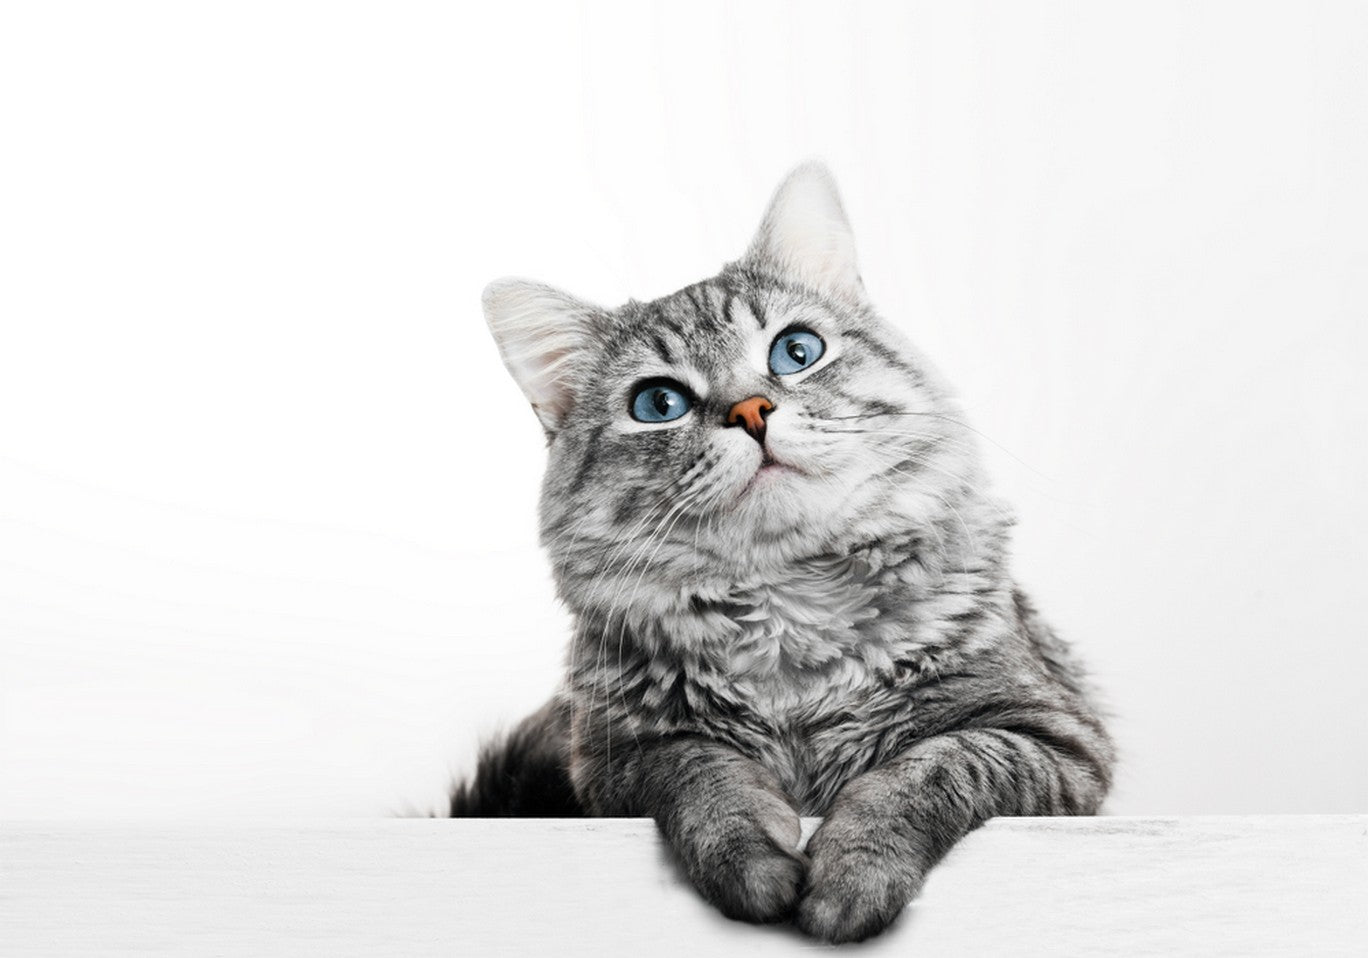 Cats - Types of Cats, Fun Facts & More